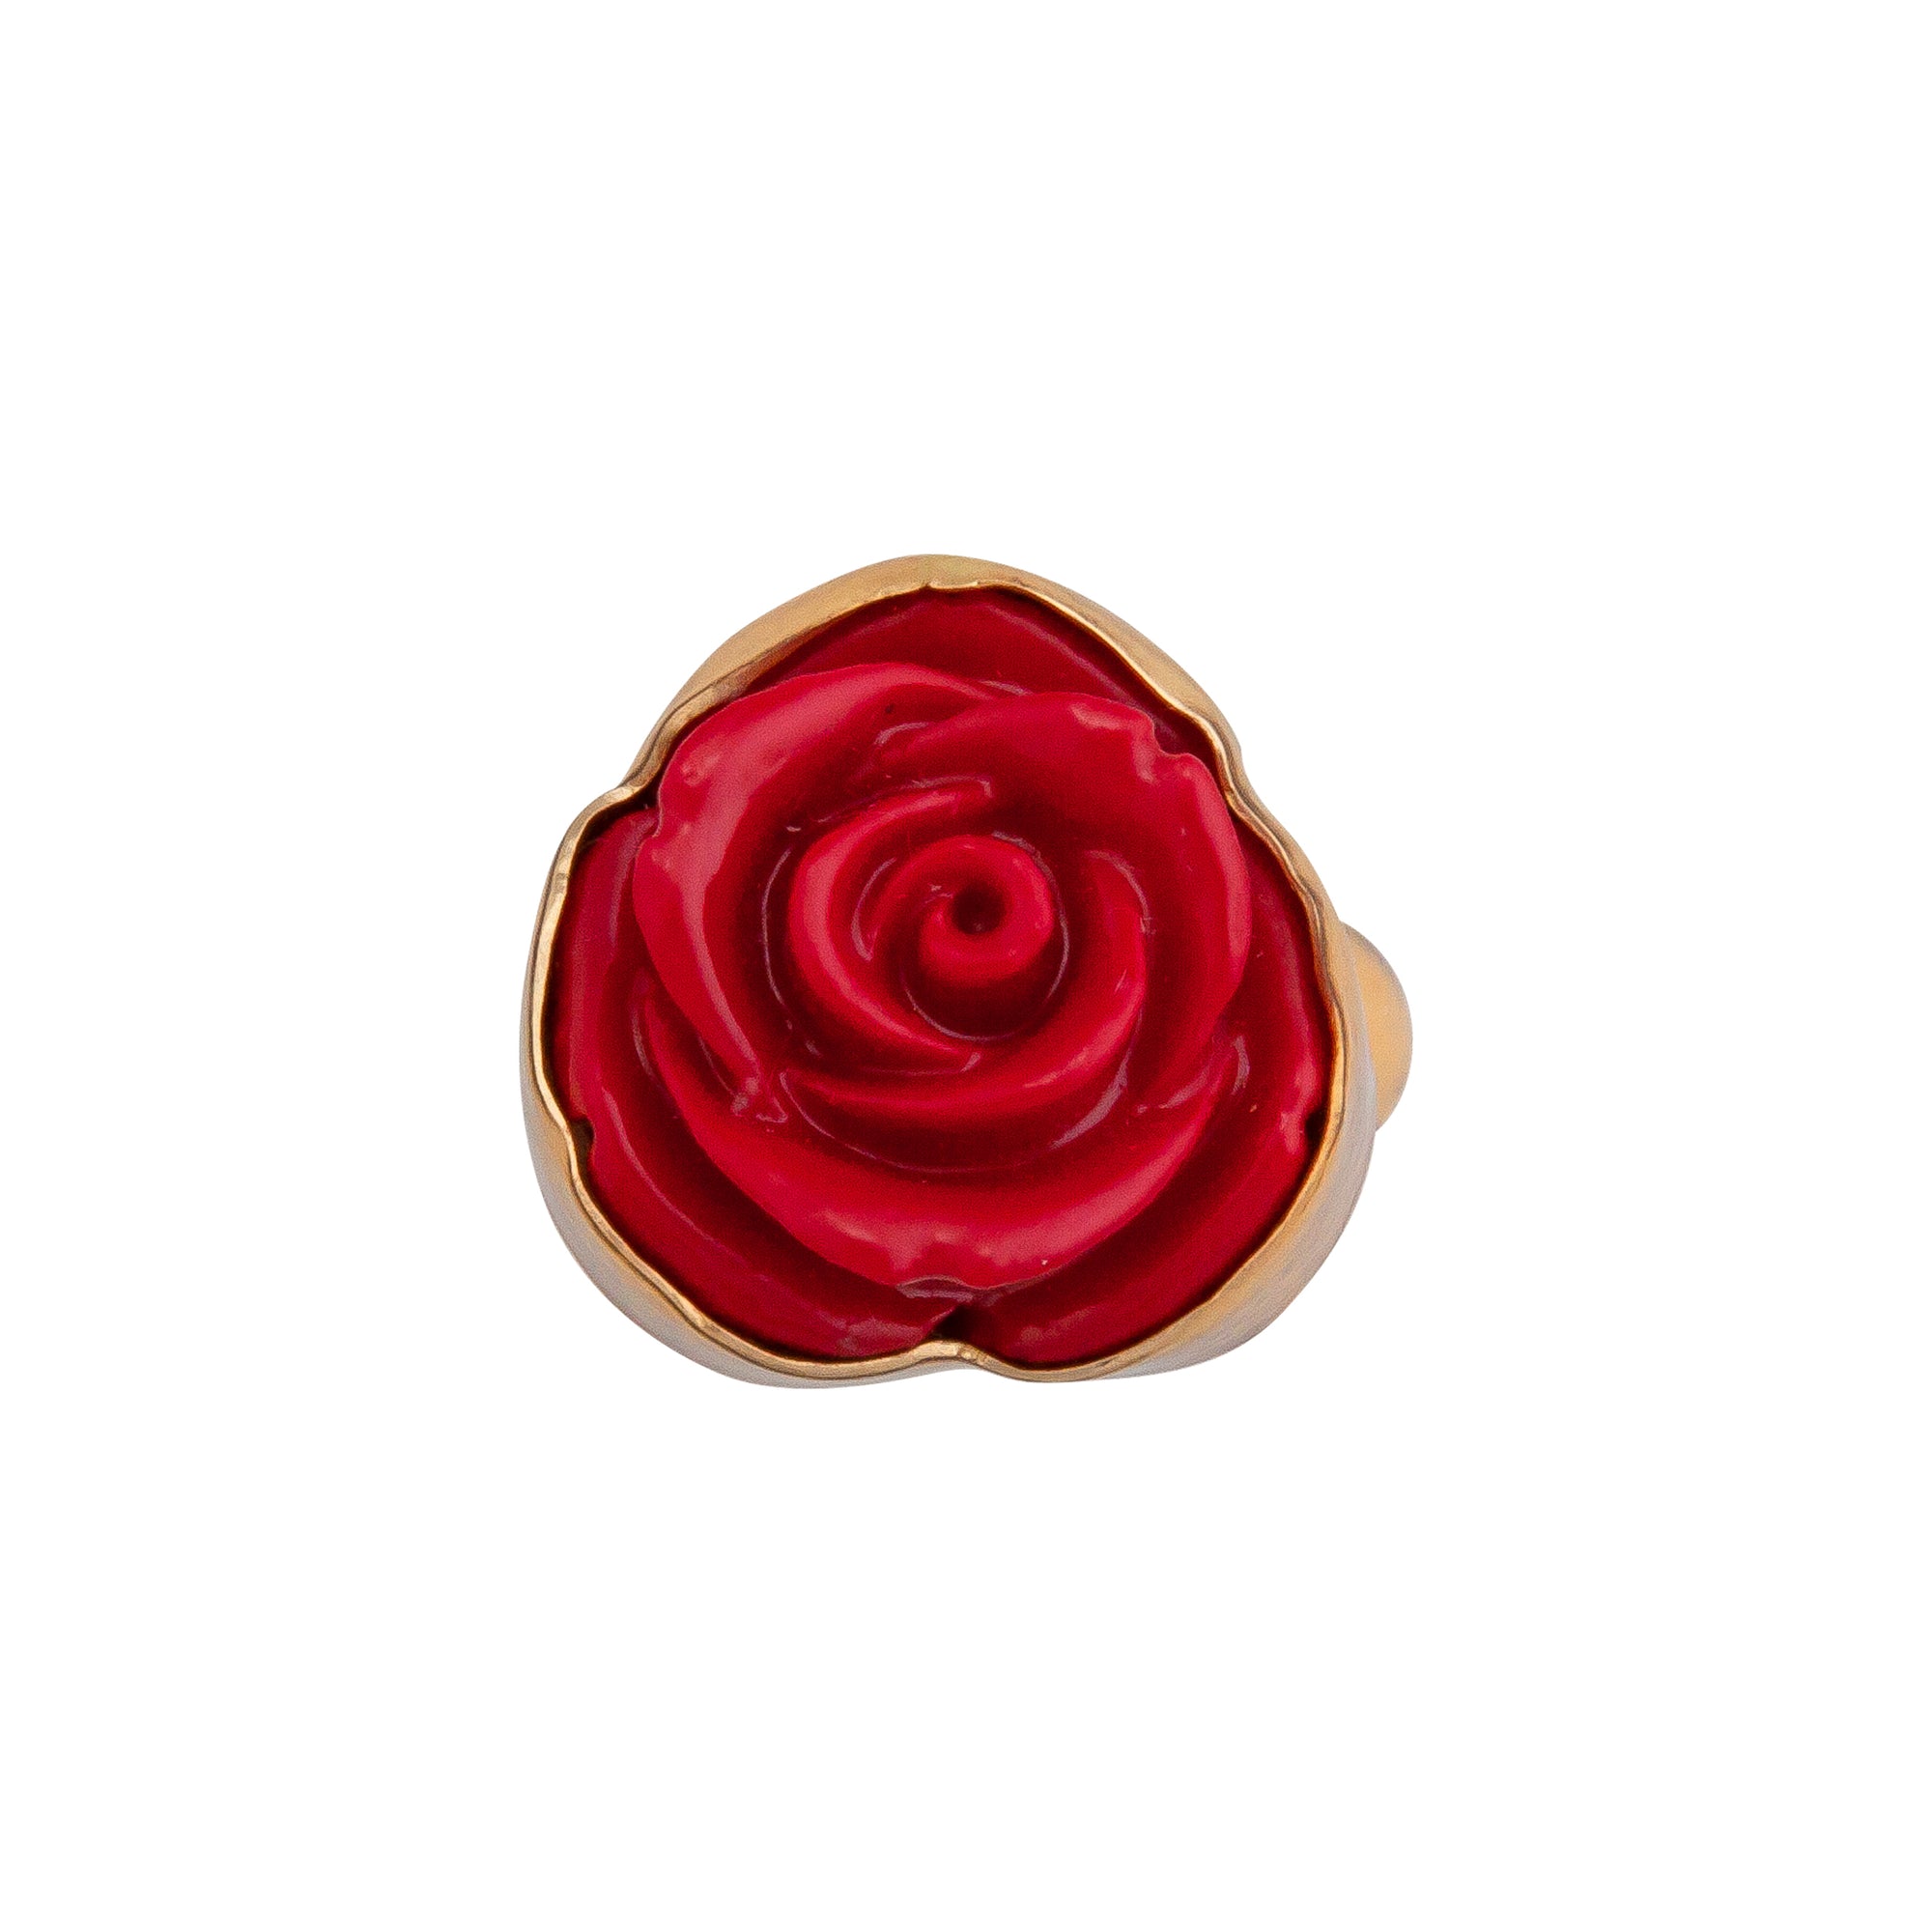 Alchemia Red Resin Rose Adjustable Ring - Charles Albert Jewelry